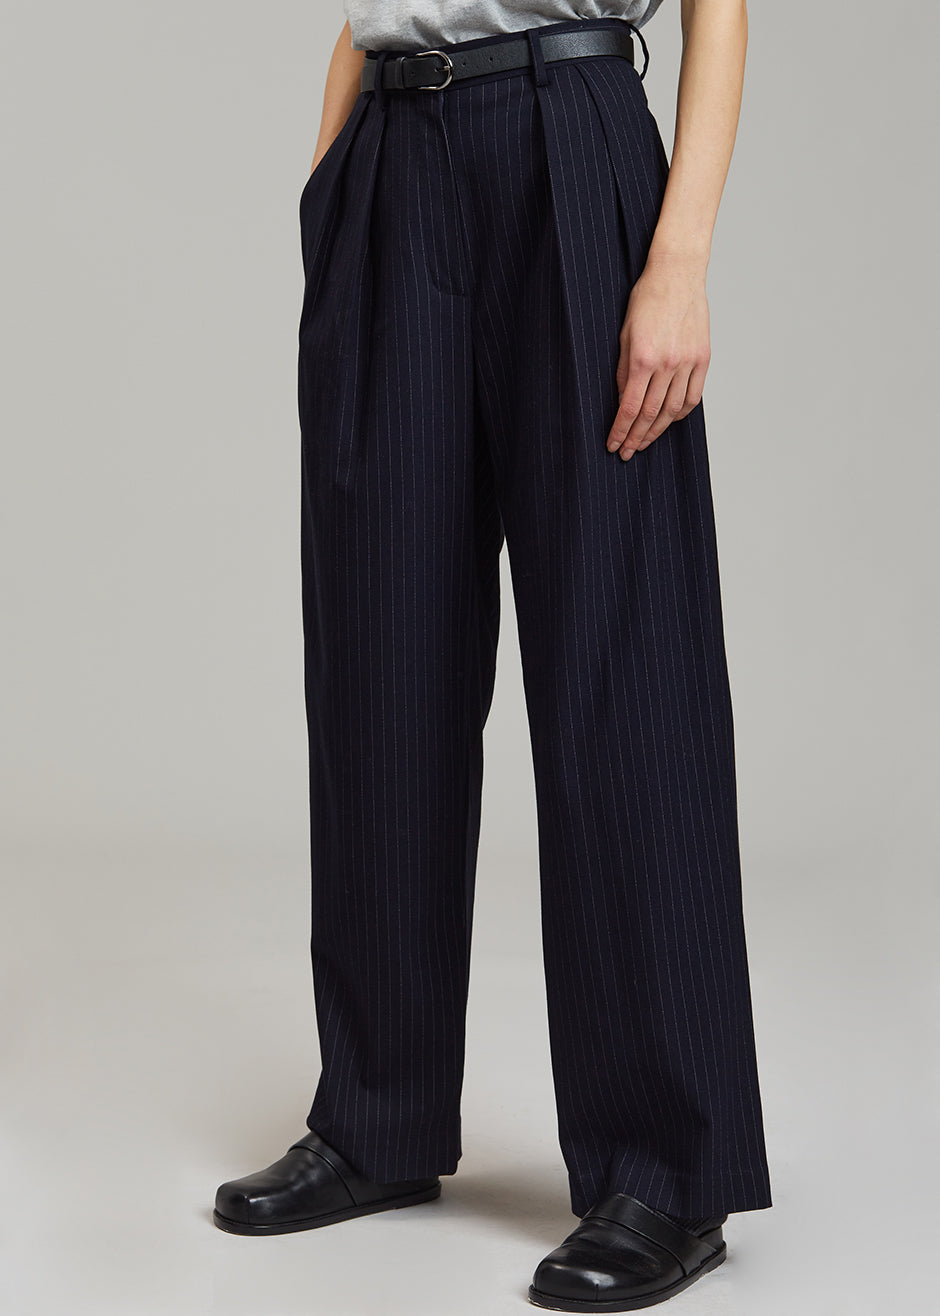 Buy Tommy Hilfiger Kids Girls Navy Mid Rise Pinstripe Trousers - NNNOW.com